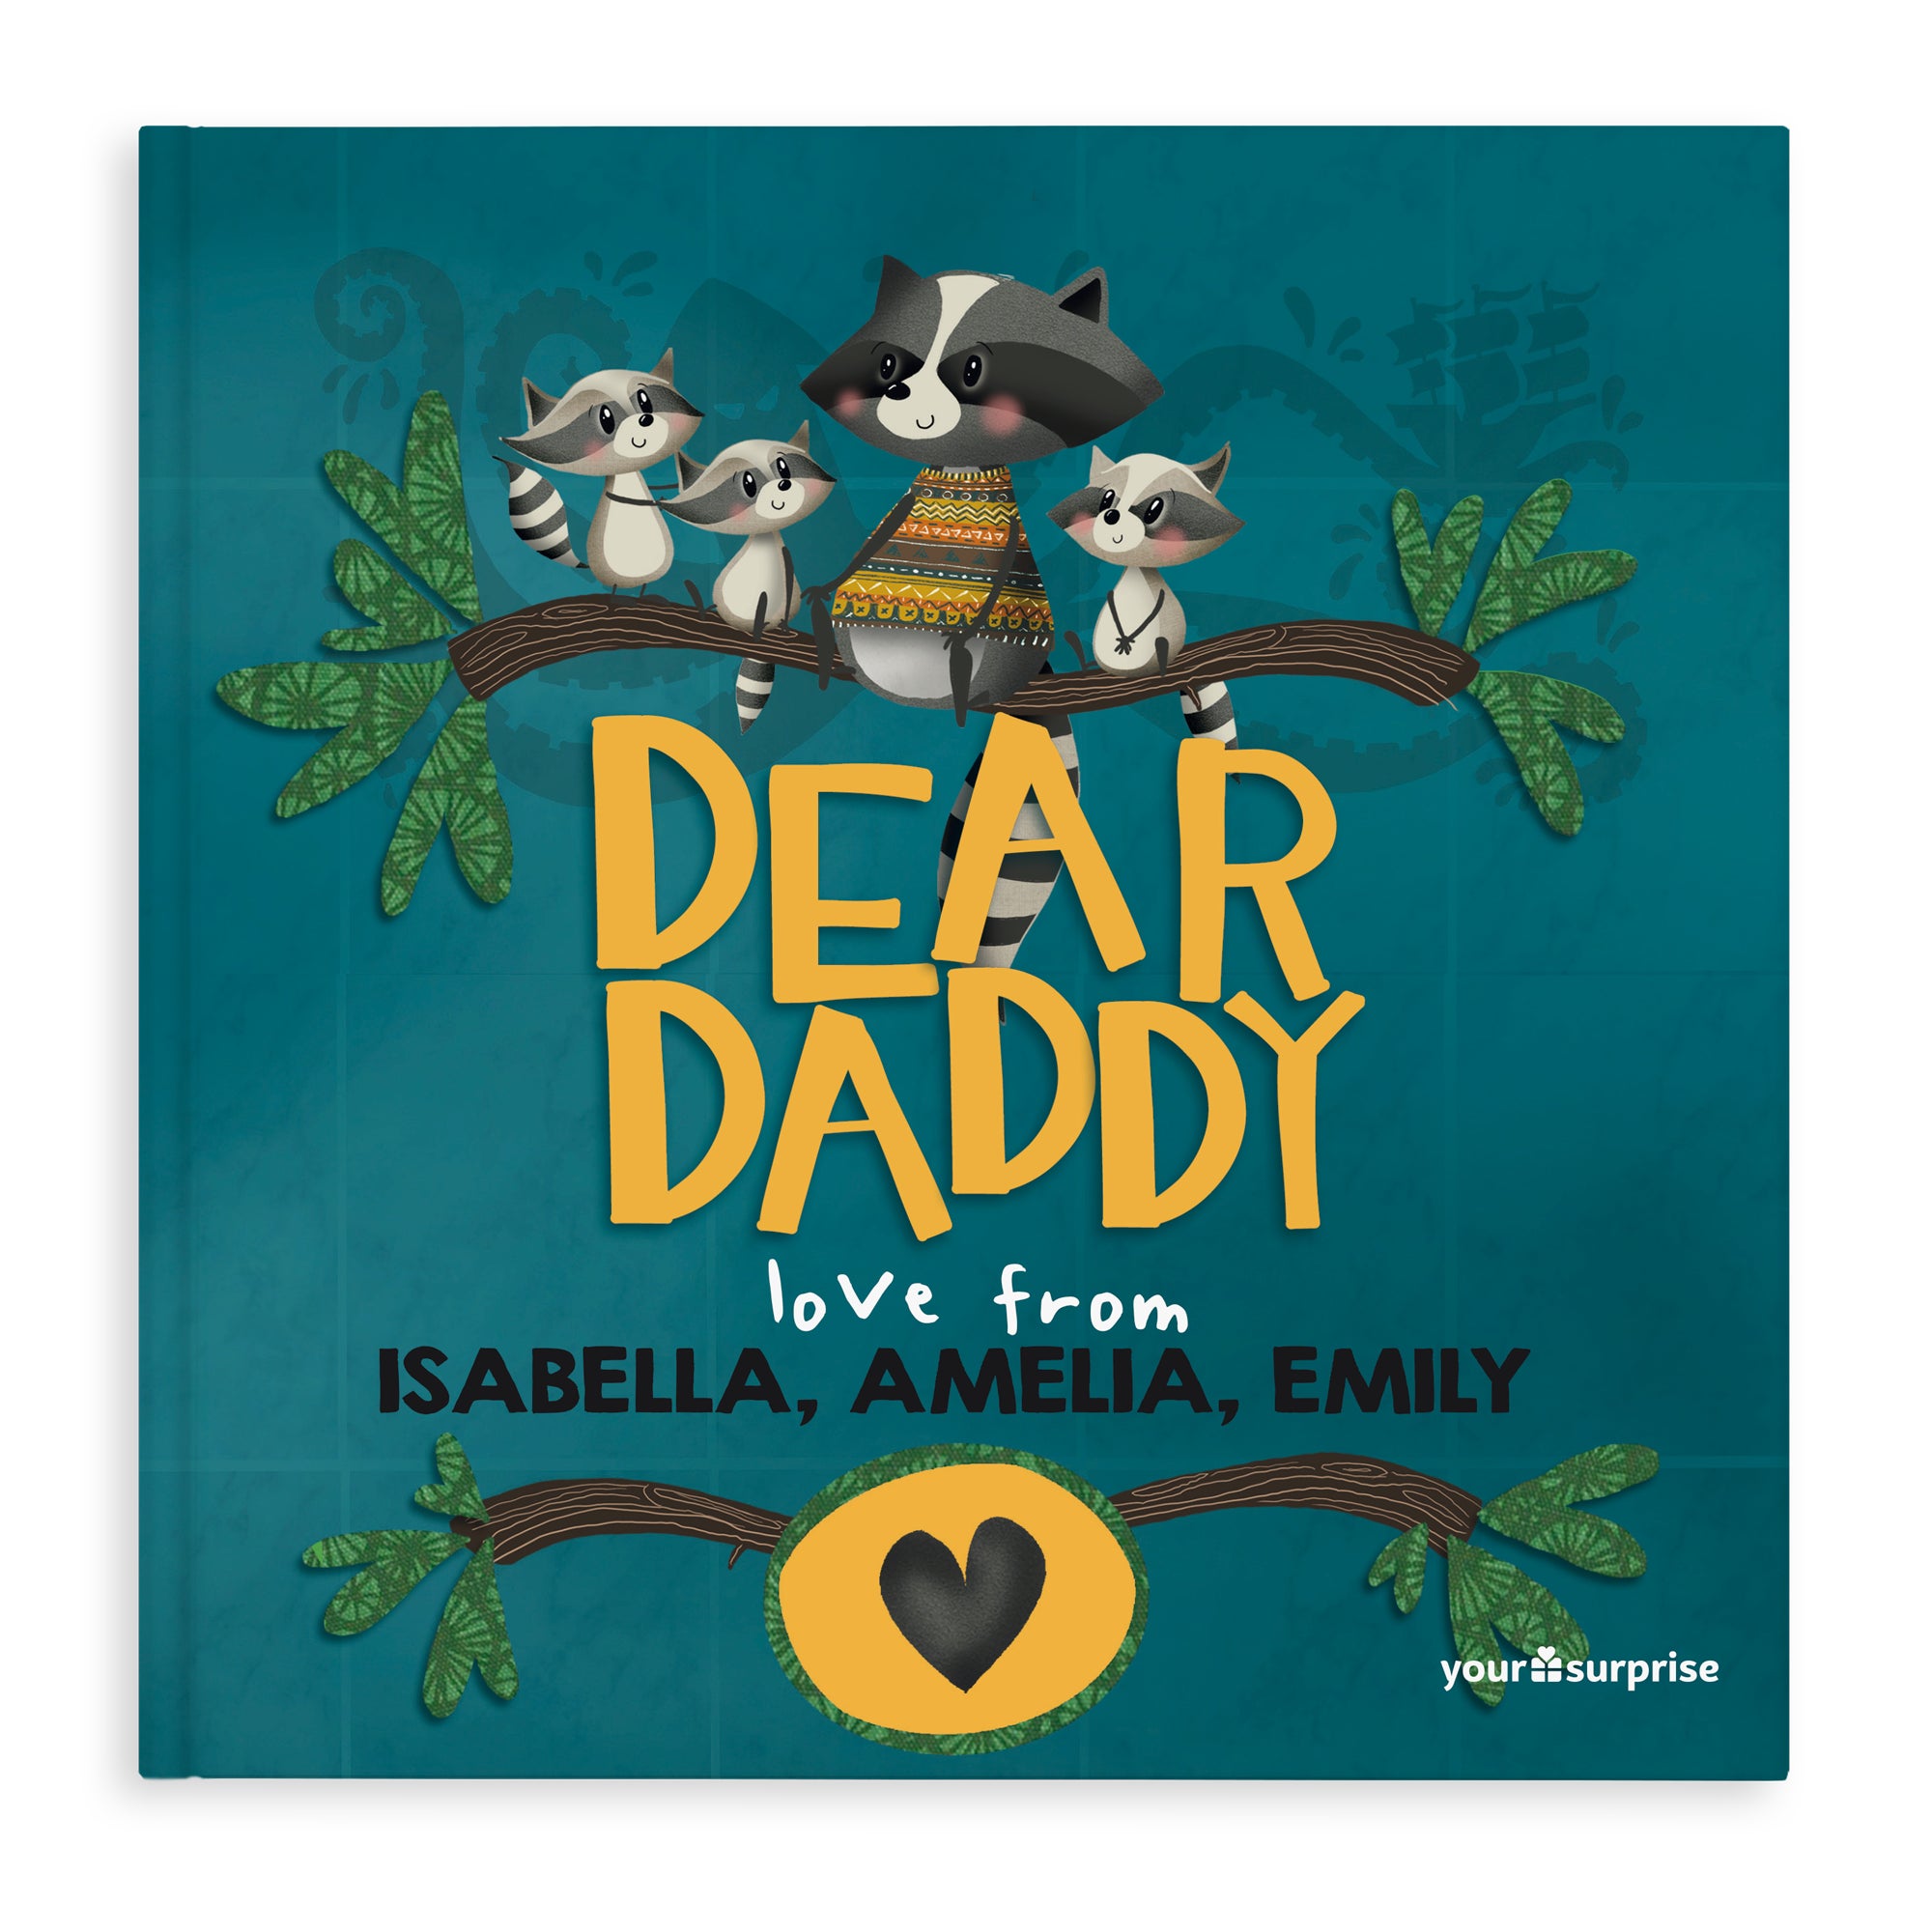 Personalised book - Dear Daddy - Softcover